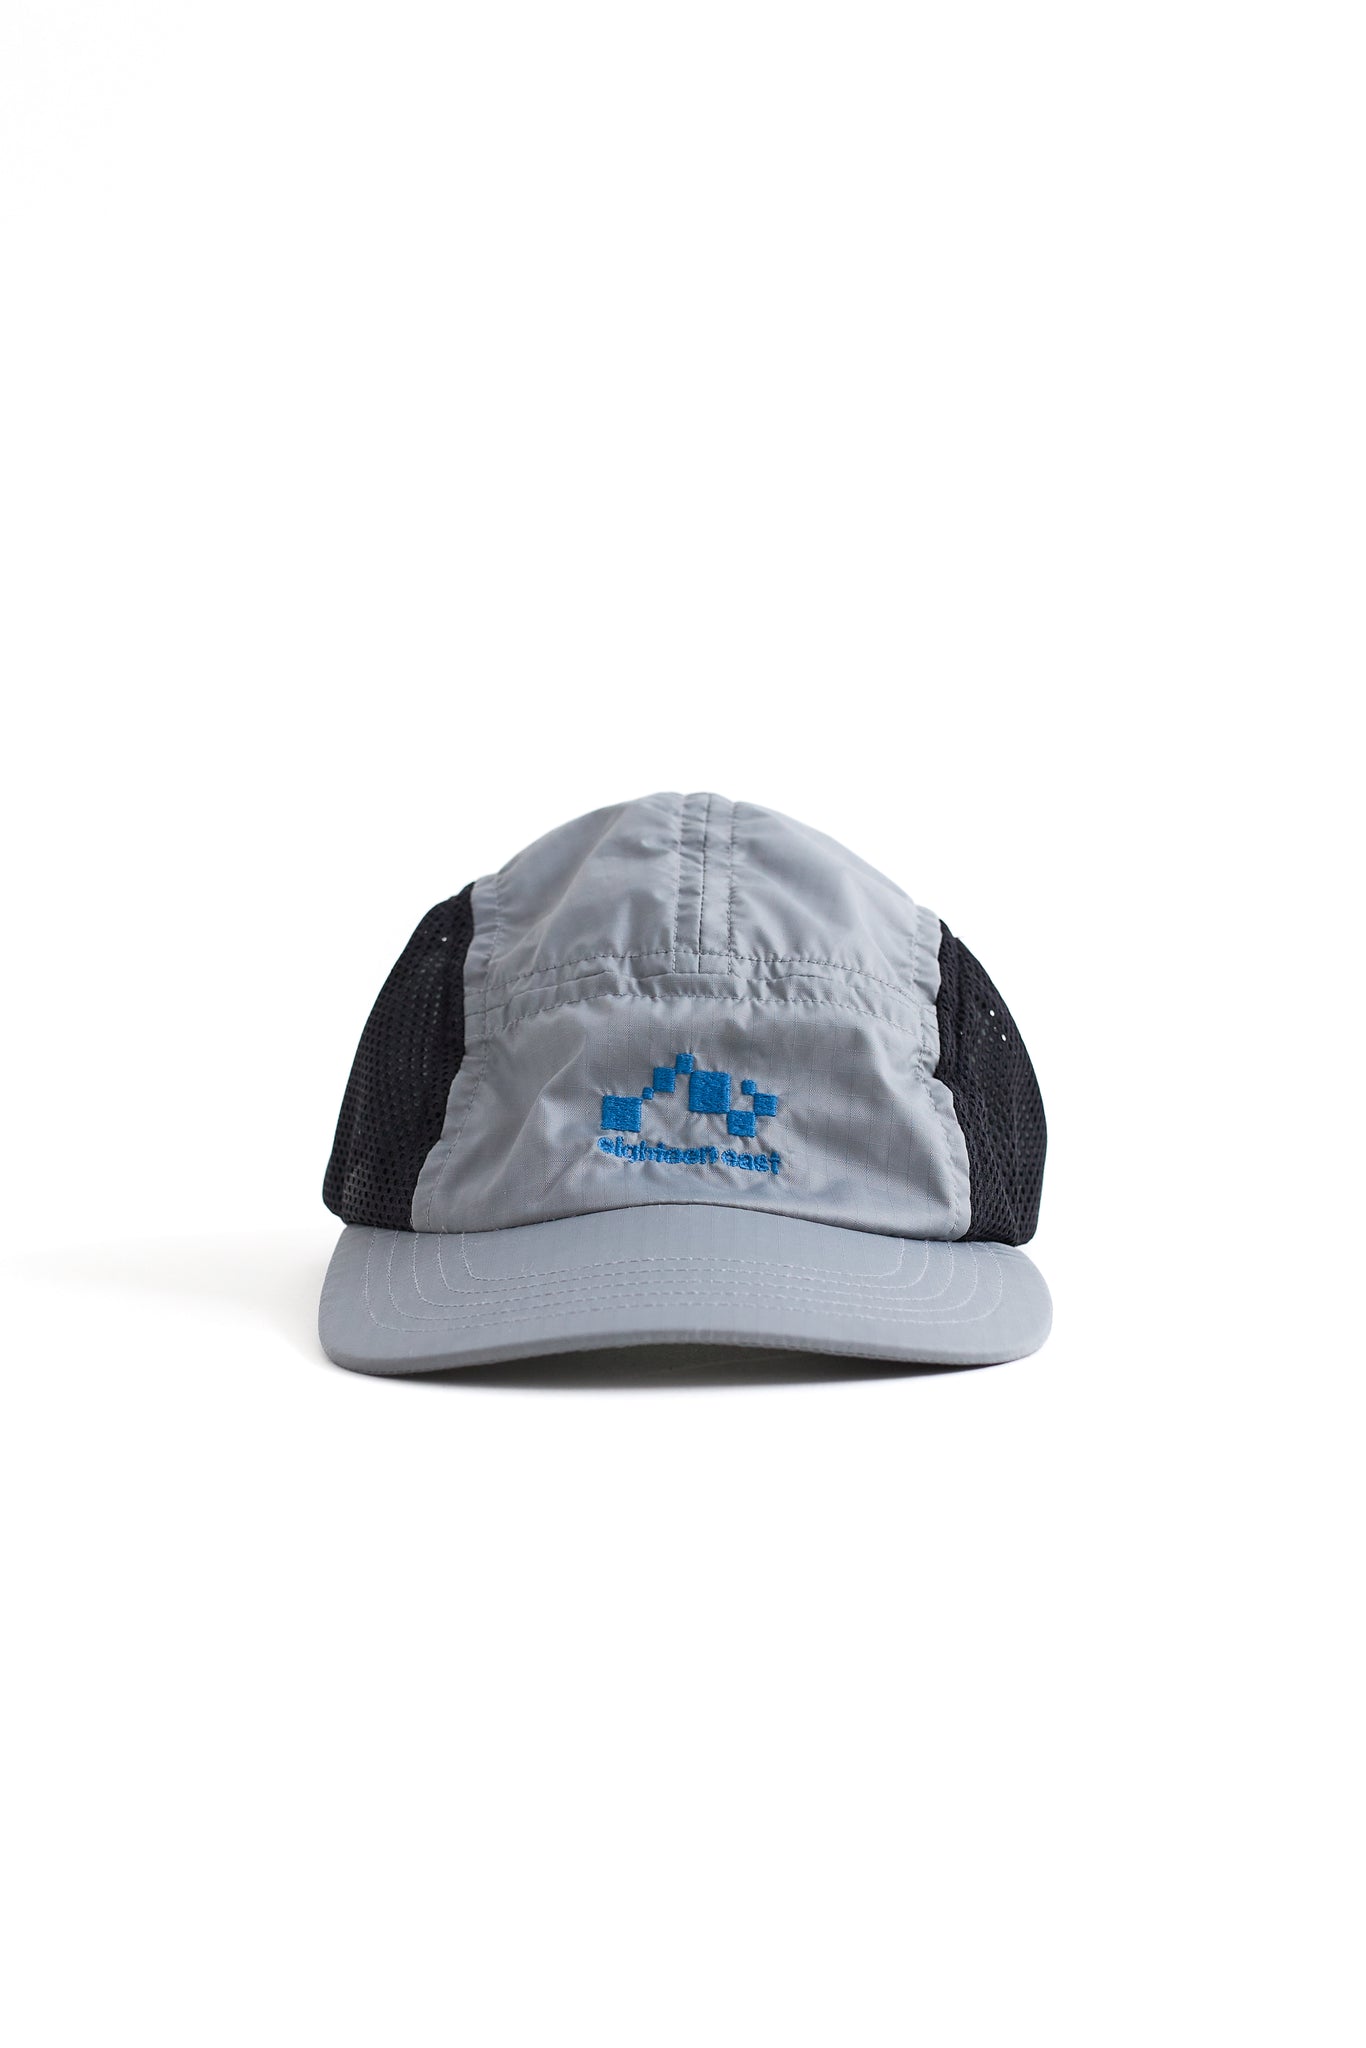 WELSH VENTED CAMP HAT - SILVER NYLON RIPSTOP